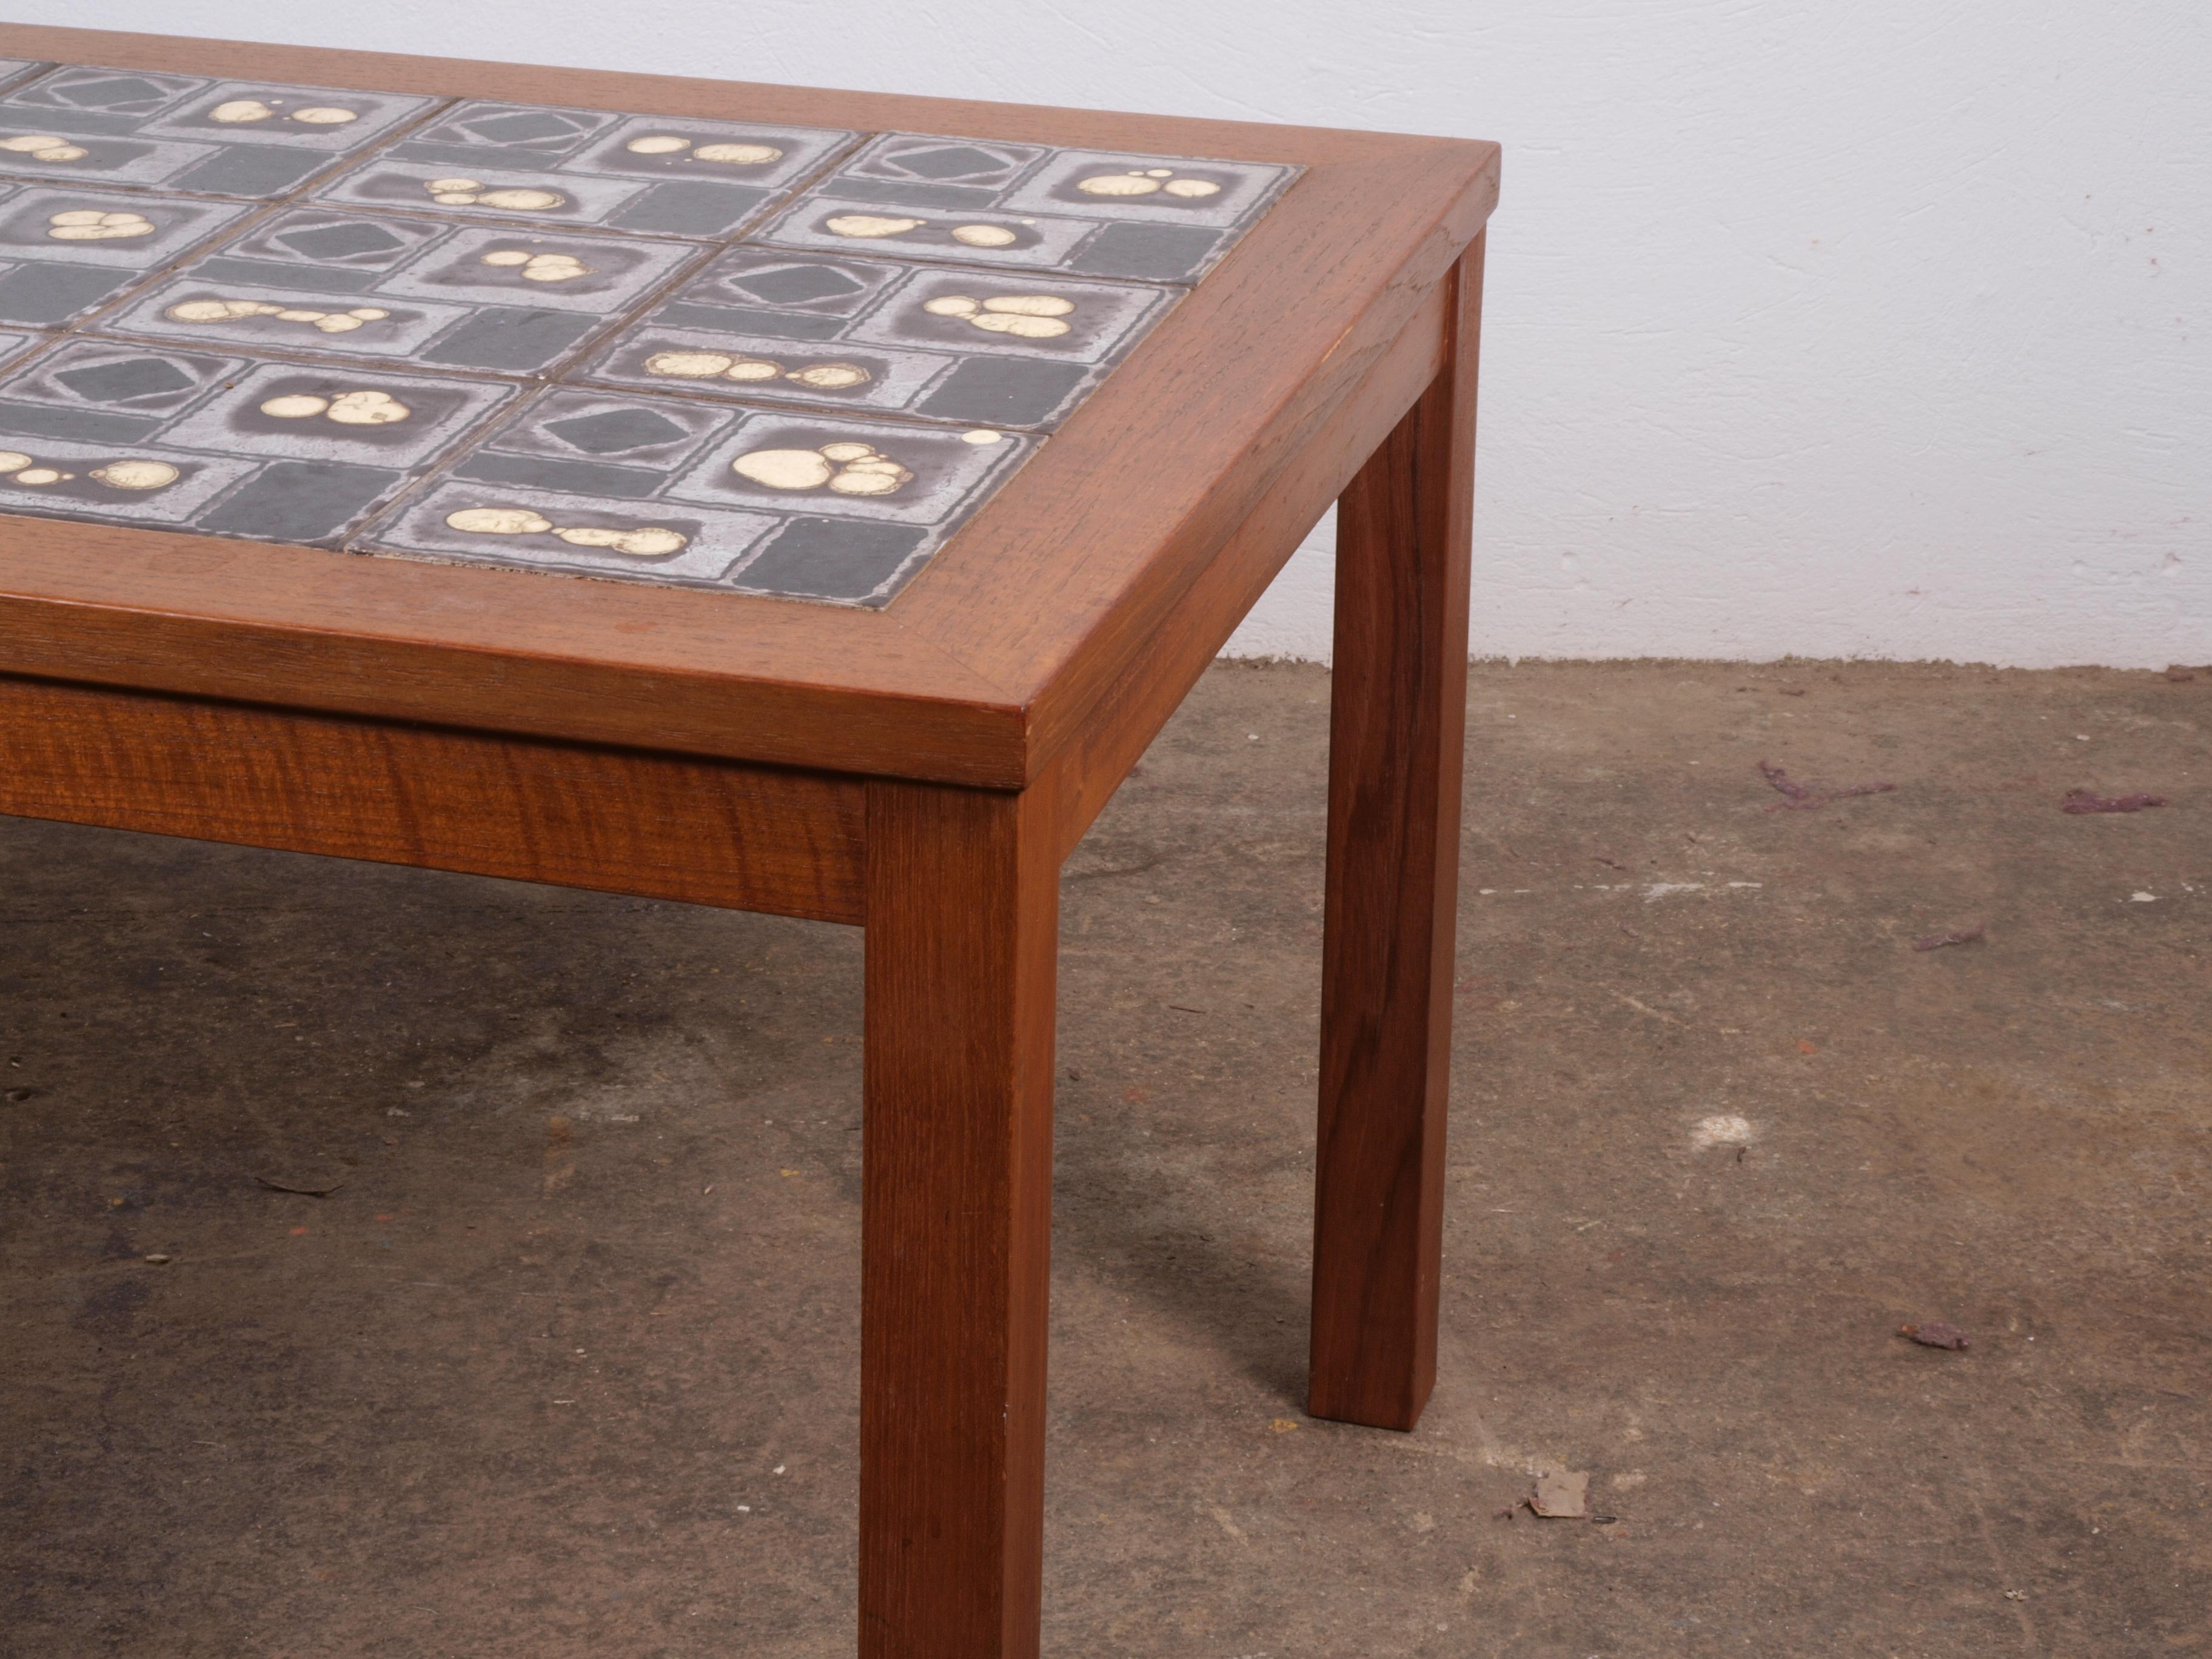 Danish Teak coffee Table with Ceramic Tile Top, 1960s In Good Condition For Sale In Store Heddinge, DK